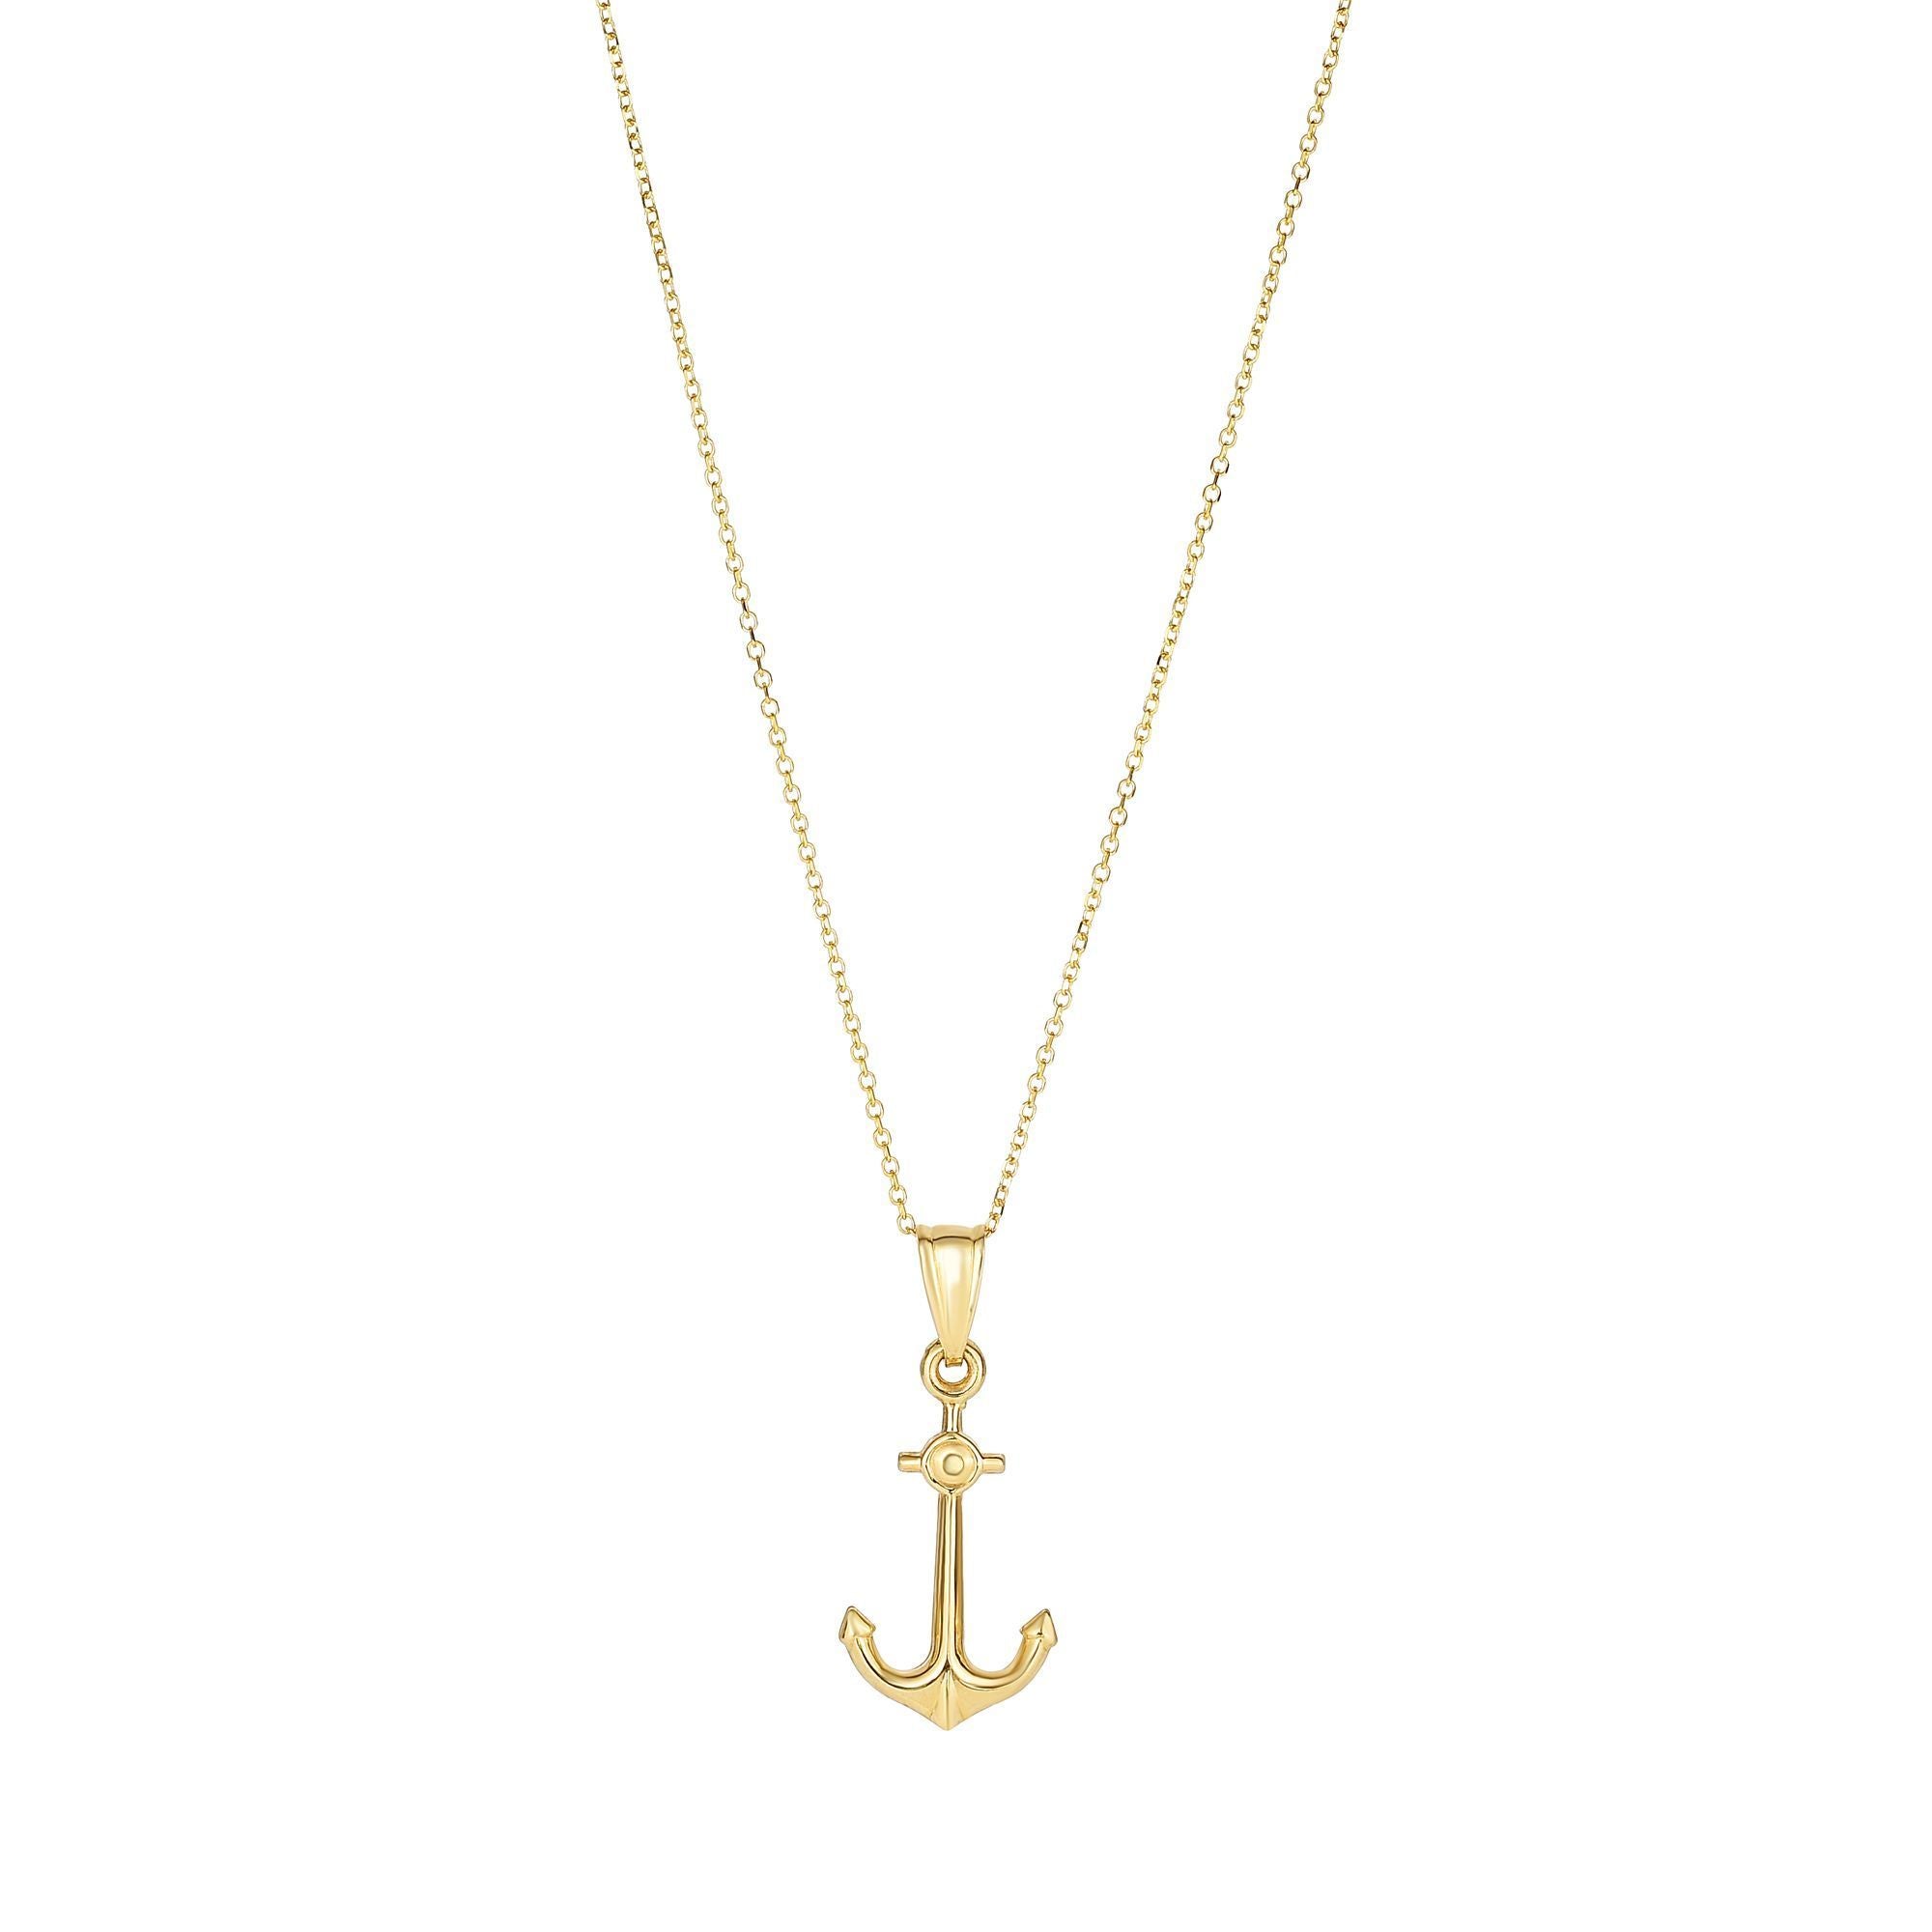 Minimalist Solid Gold Anchor Necklace - wingroupjewelry